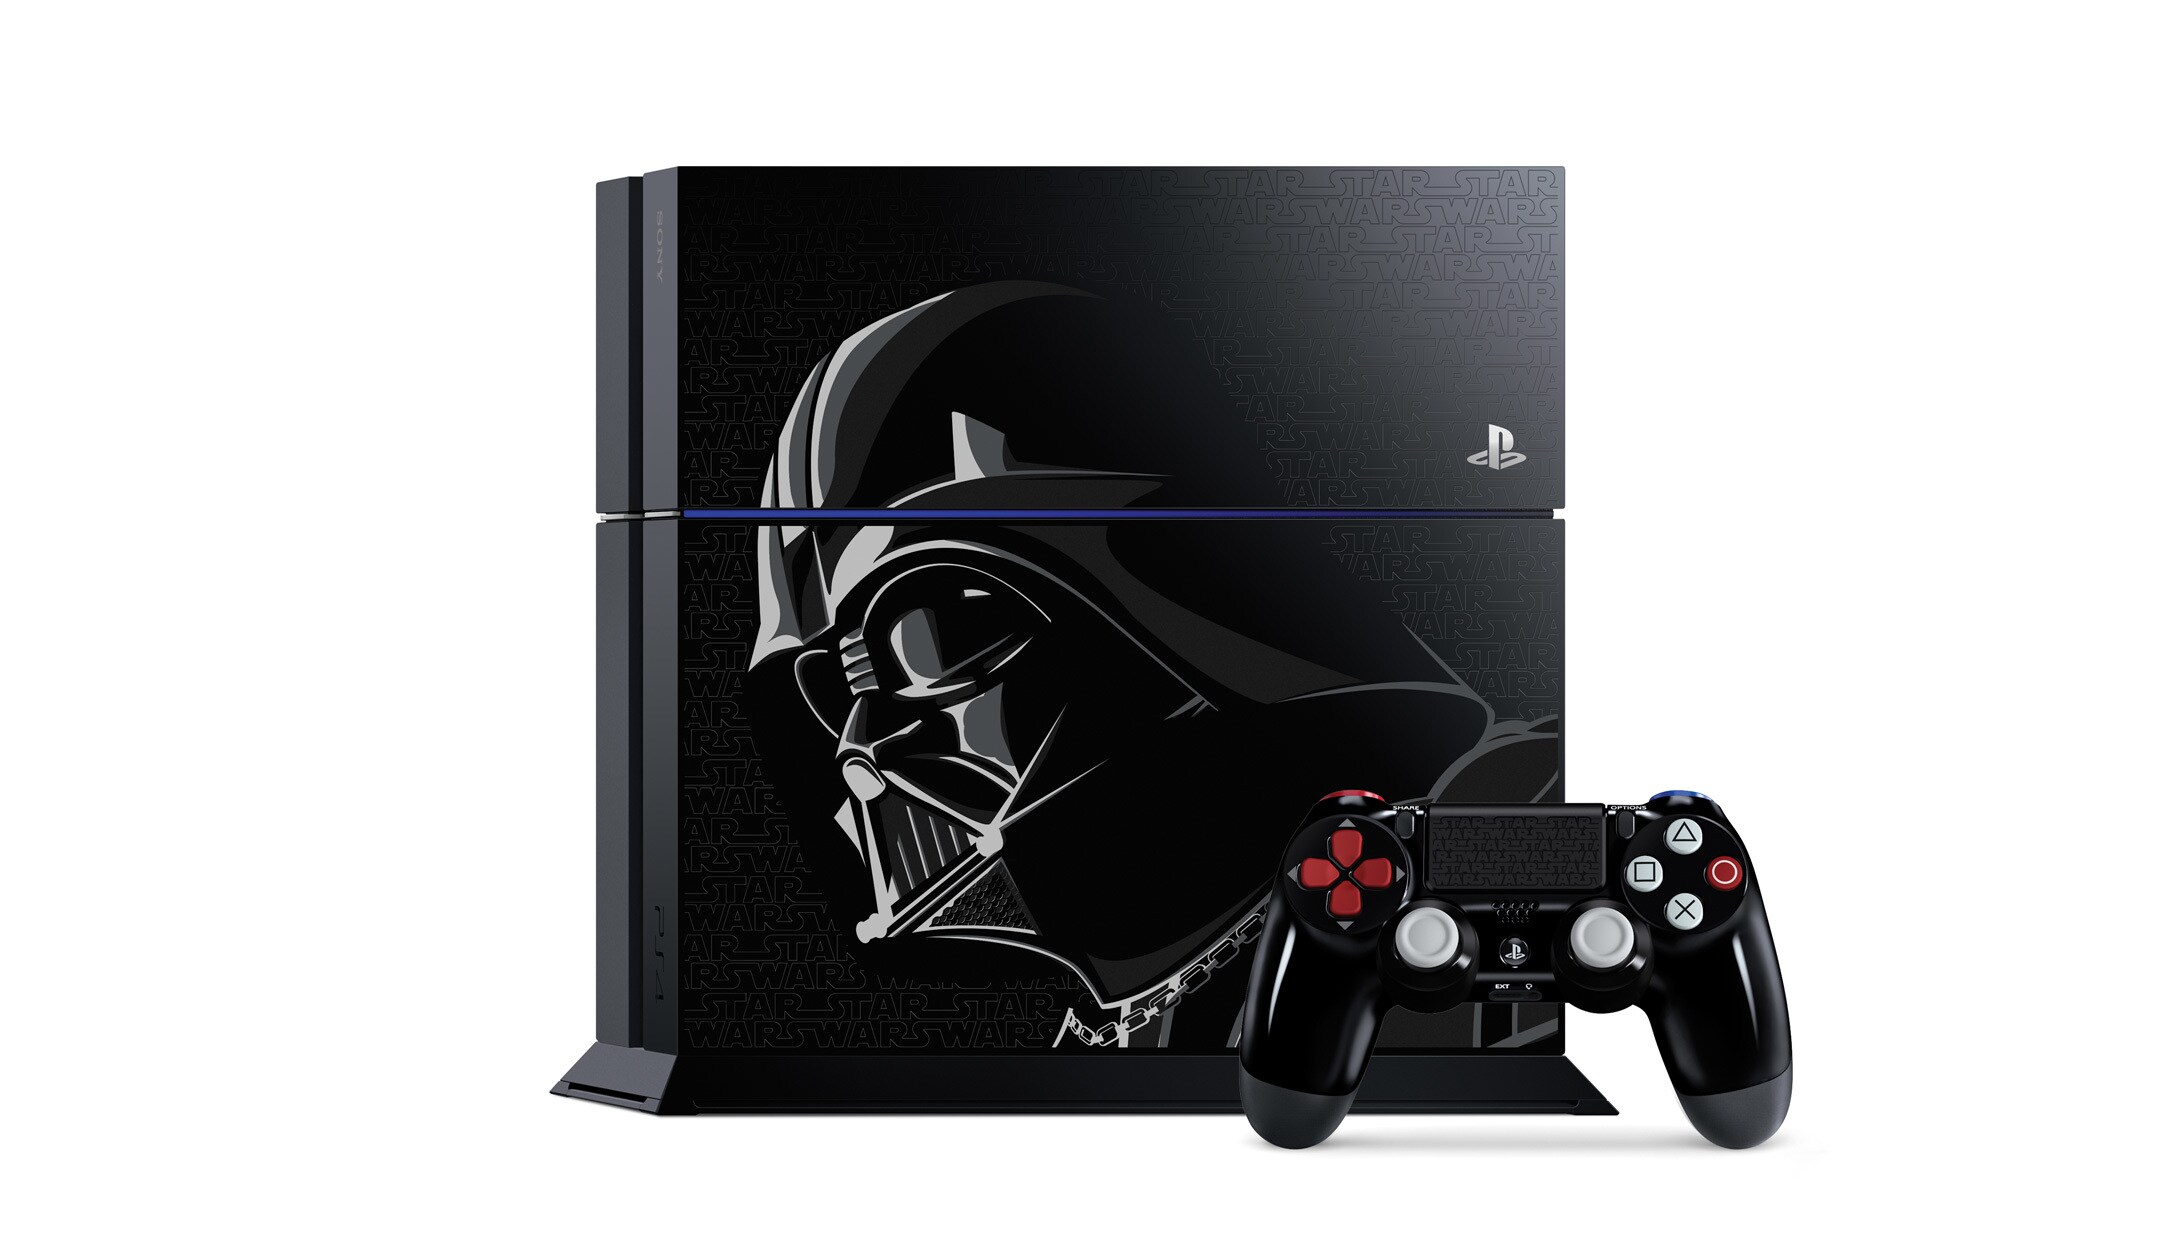 Ps2 ps4. PLAYSTATION 4 1tb Star Wars Limited Edition. Sony PLAYSTATION 4 Pro Star Wars. Sony ps4 Star Wars Console. Ps4 Darth Vader Edition.